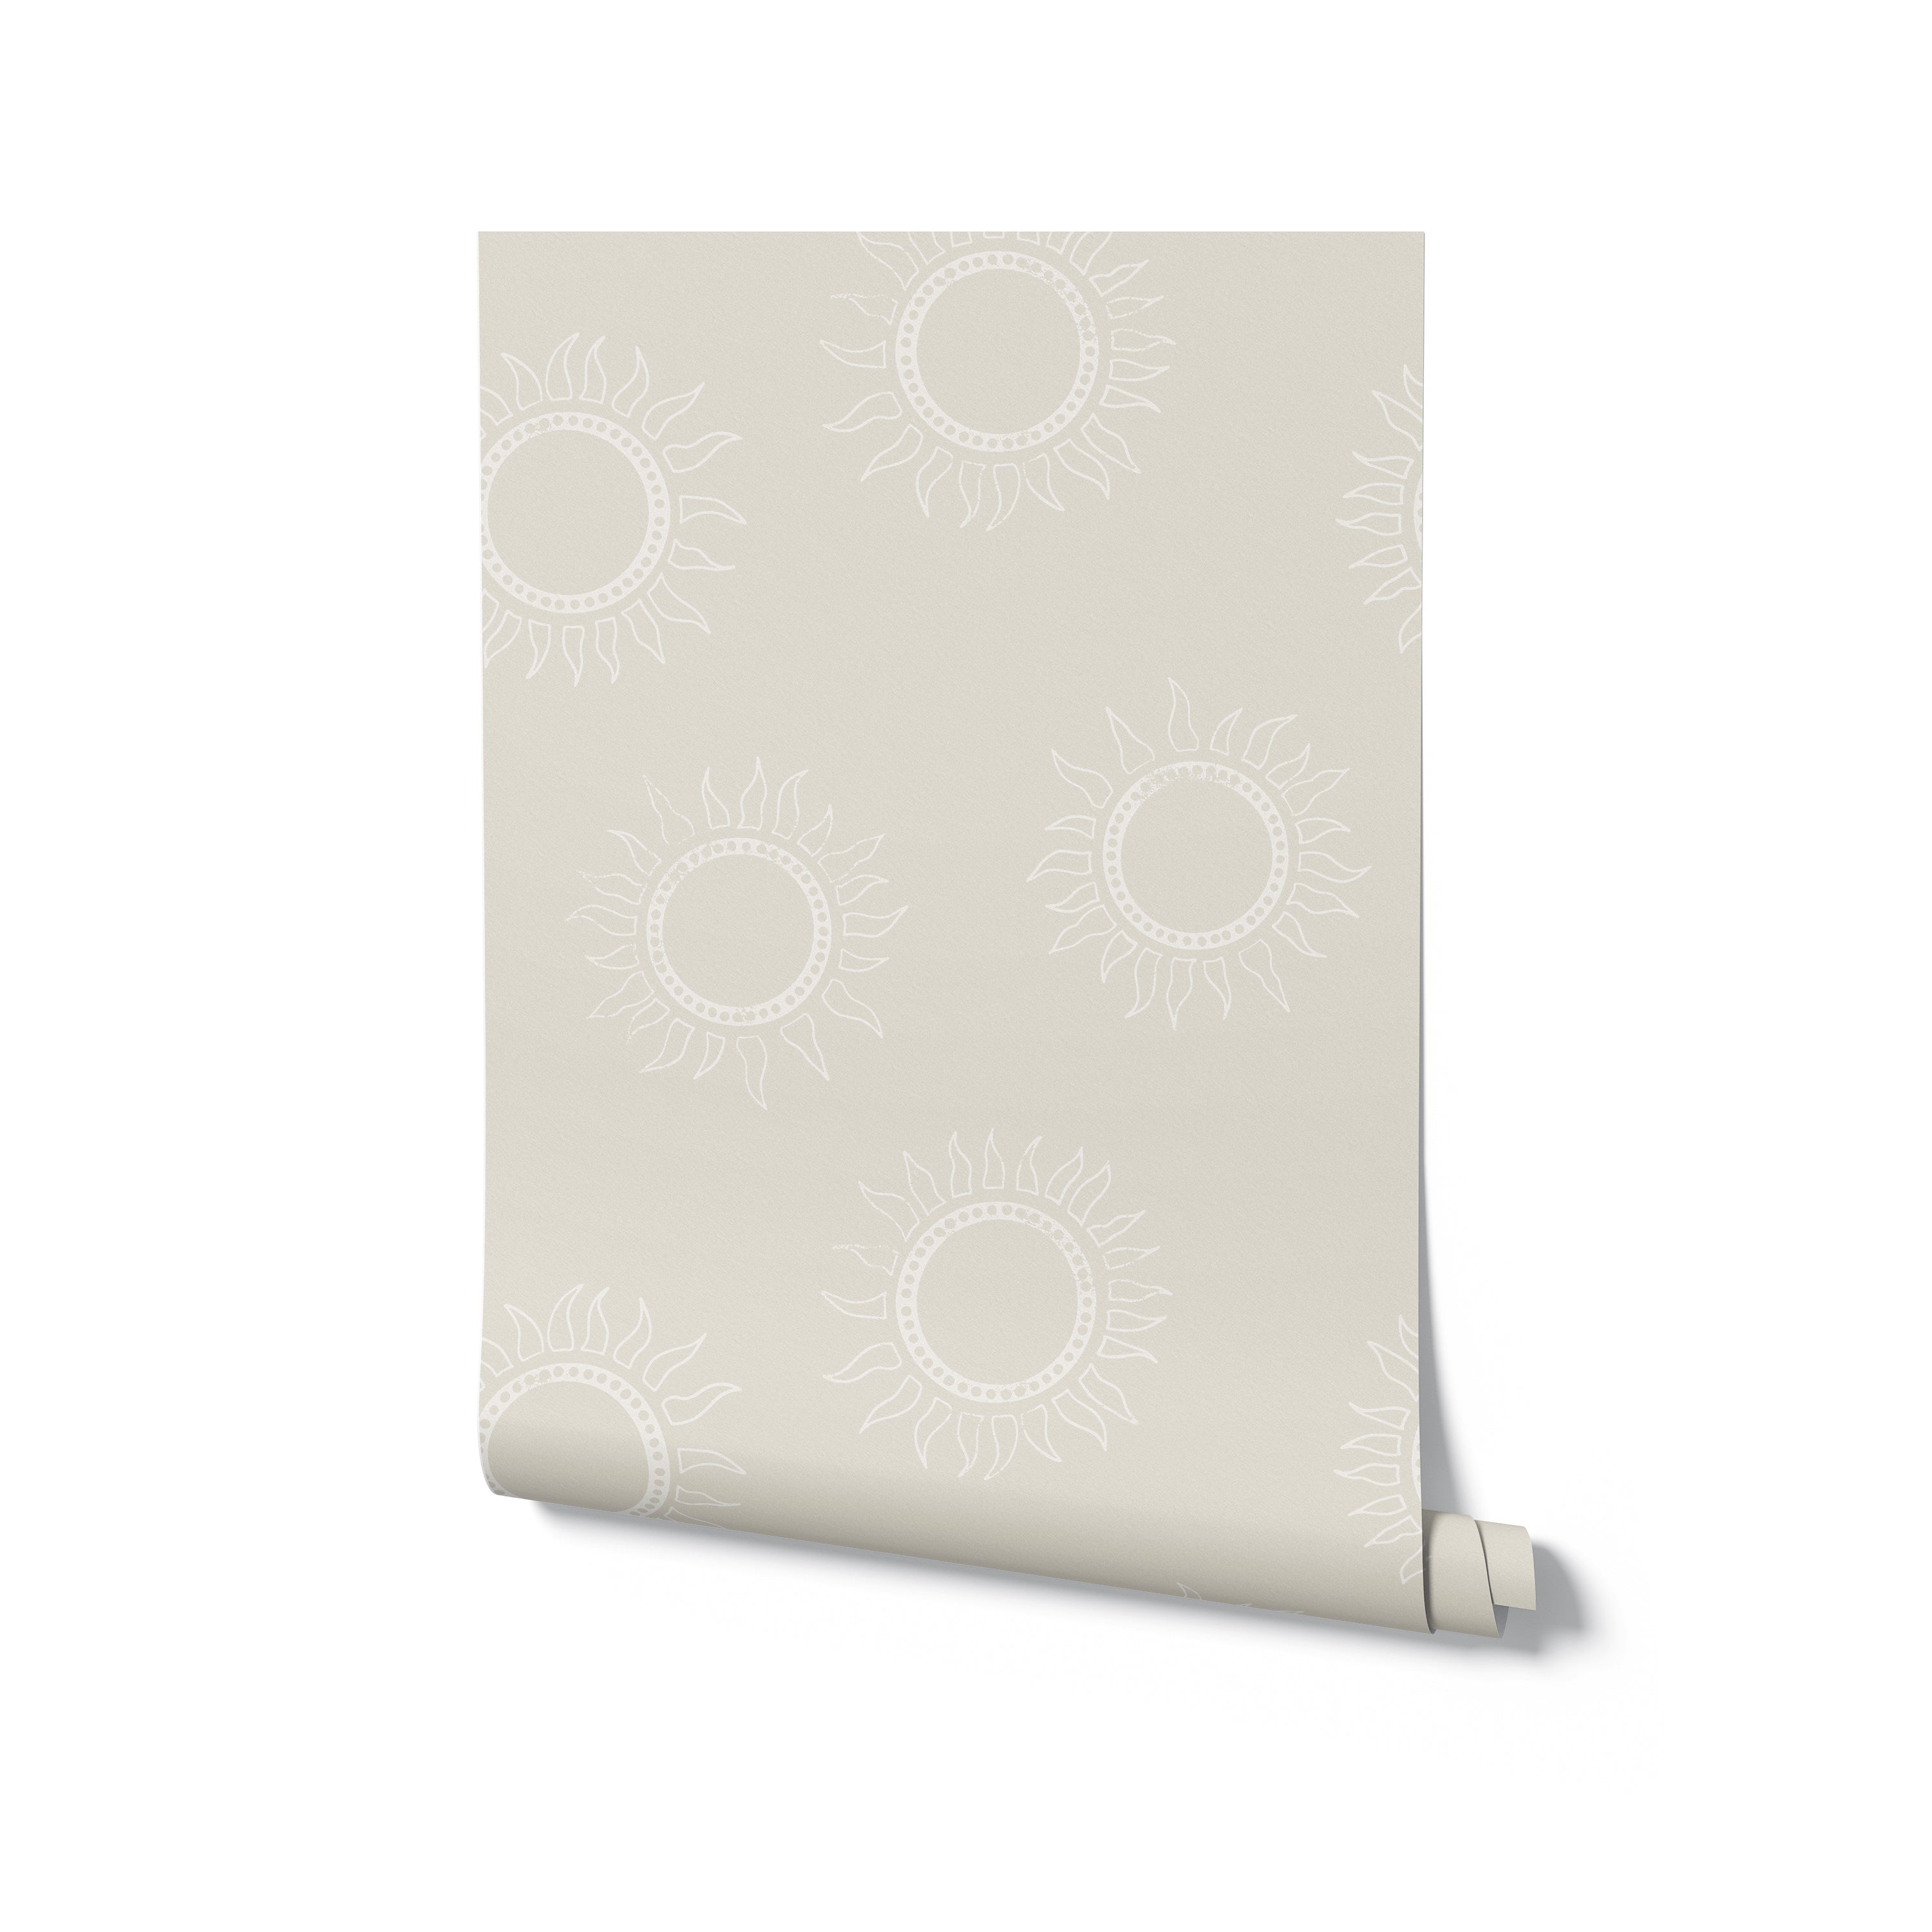 A flat lay view of a single roll of Sunburst Harmony Wallpaper. The roll showcases the detailed sunburst pattern in white on a warm beige background, emphasizing the contemporary and stylish design of the wallpaper.